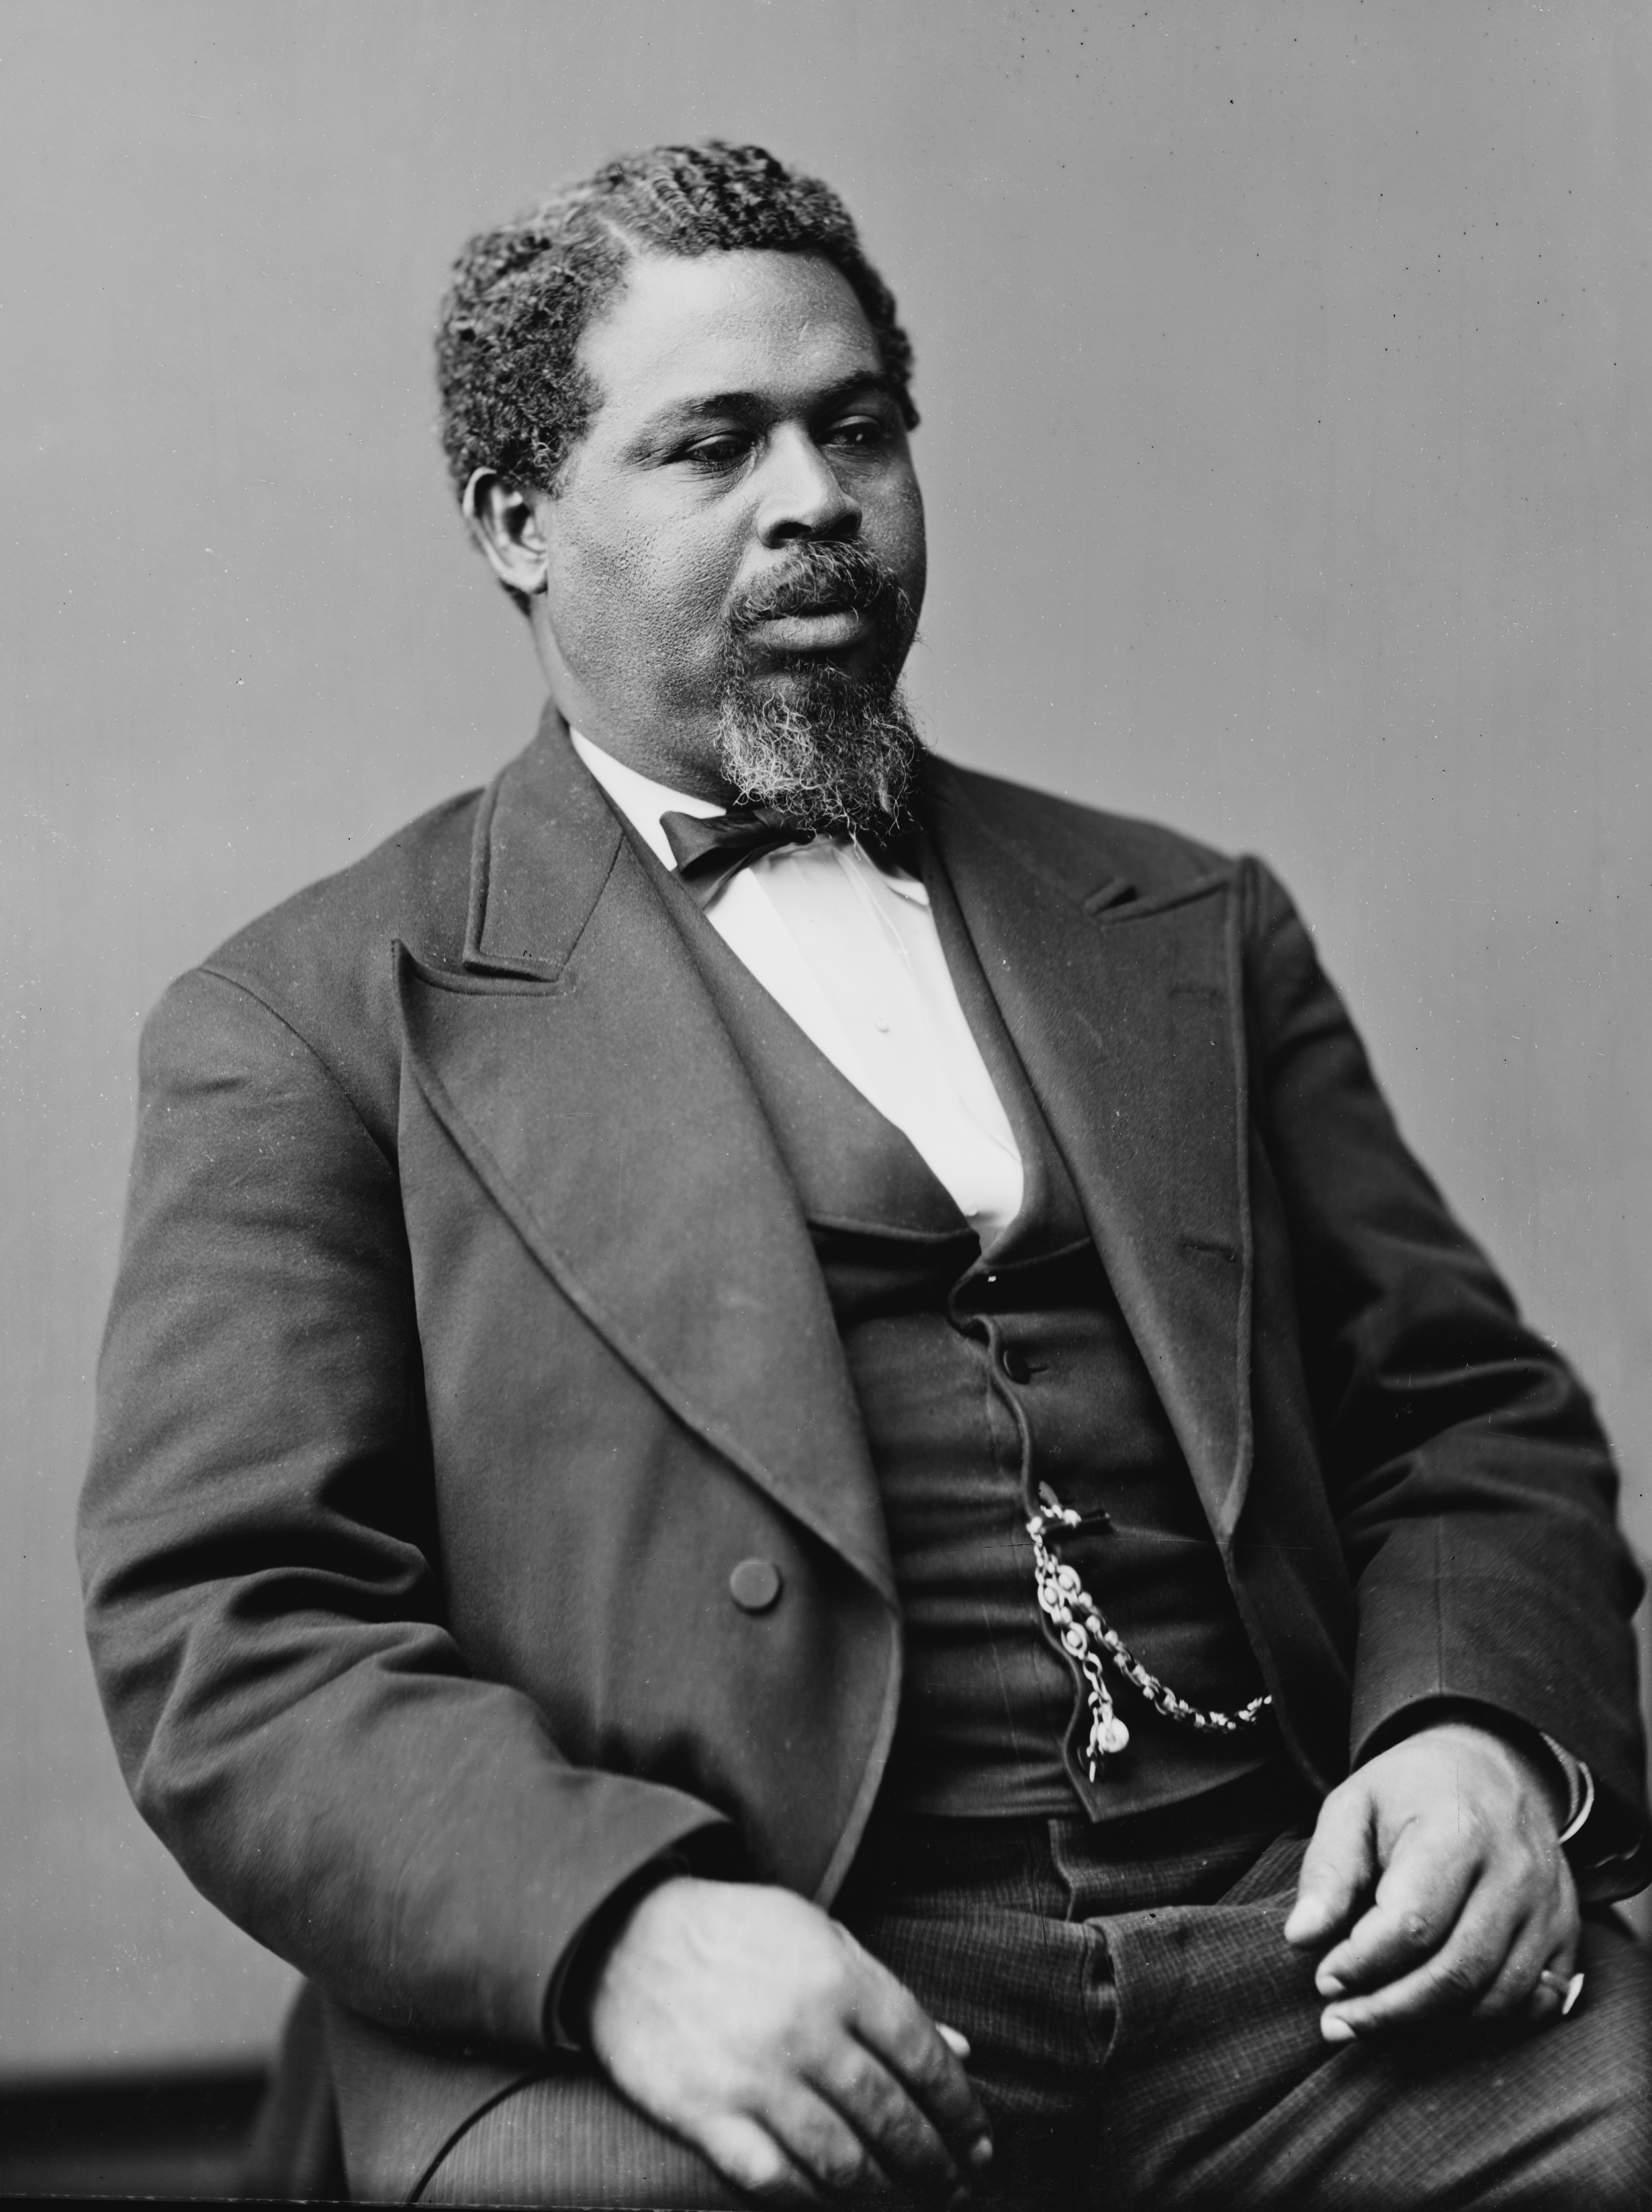 Robert Smalls pictured between 1870 and 1880.